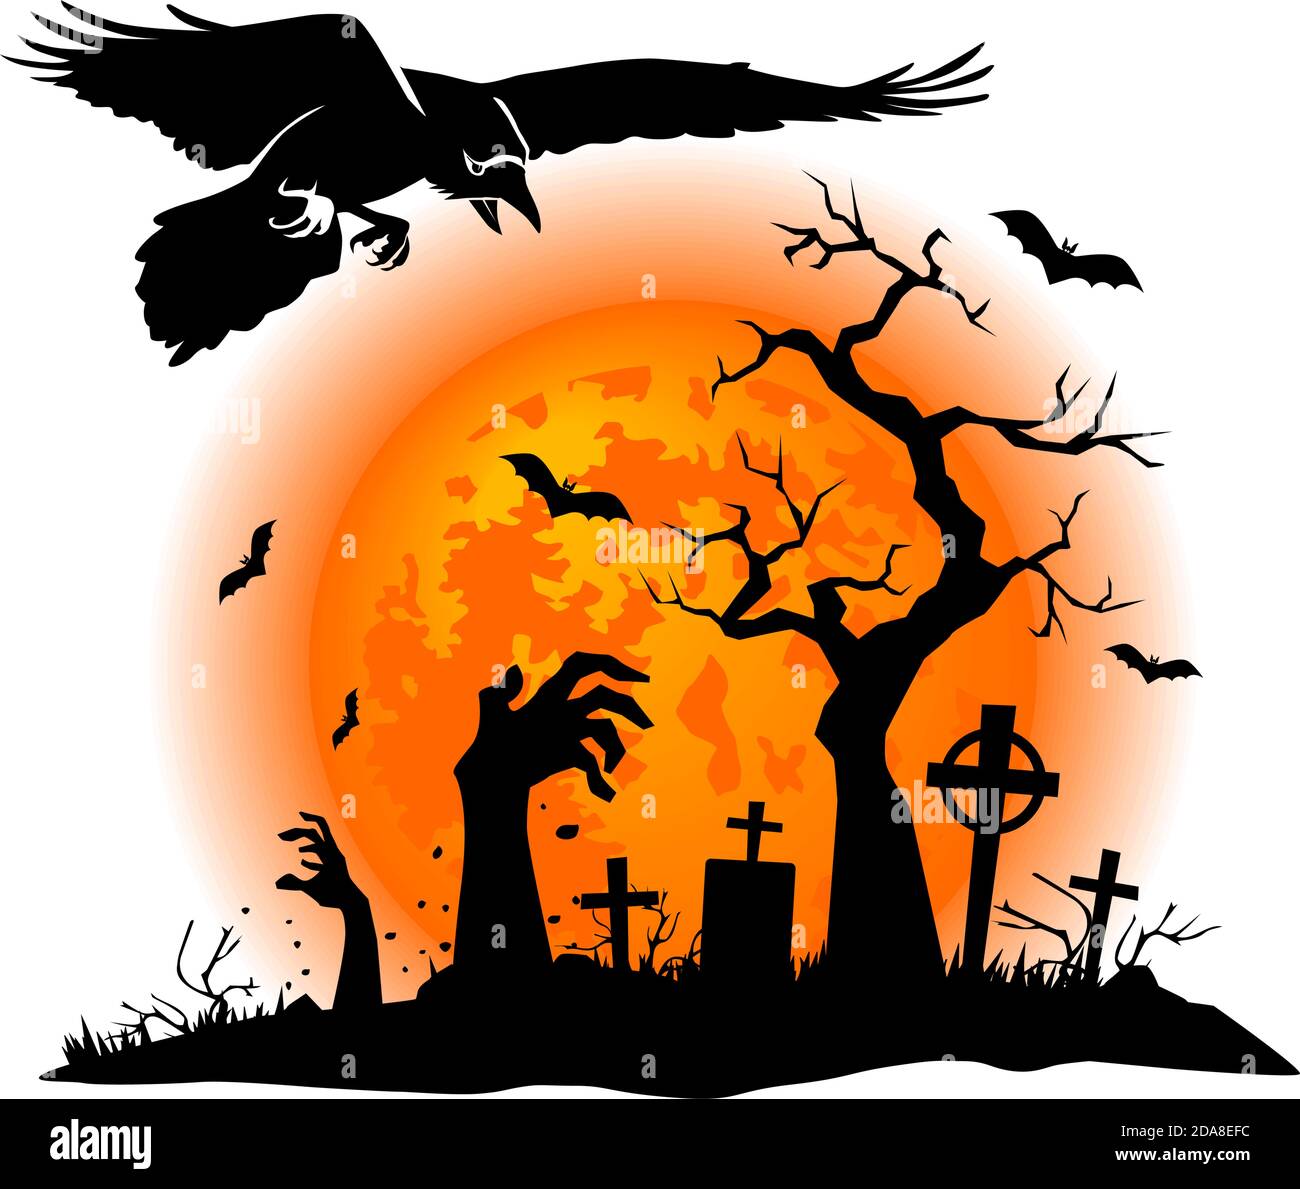 Halloween graveyard landscape with horror elements. Black raven against the background of a full moon, a grave, a dead zombie hand. Illustration, vect Stock Vector